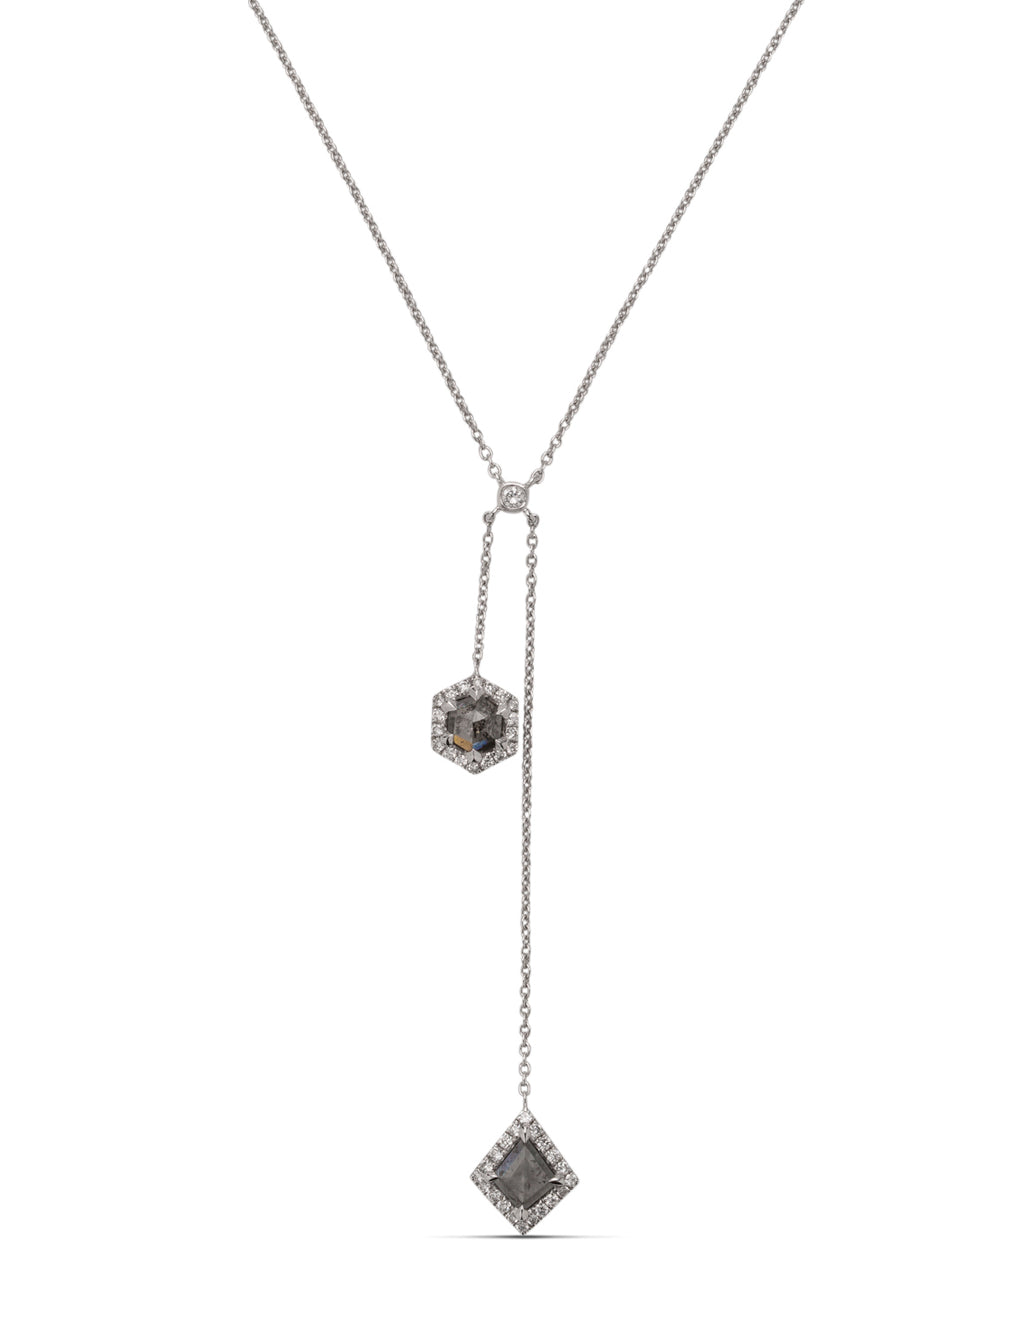 Double Rough Grey Diamond Necklace - Charles Koll Jewellers